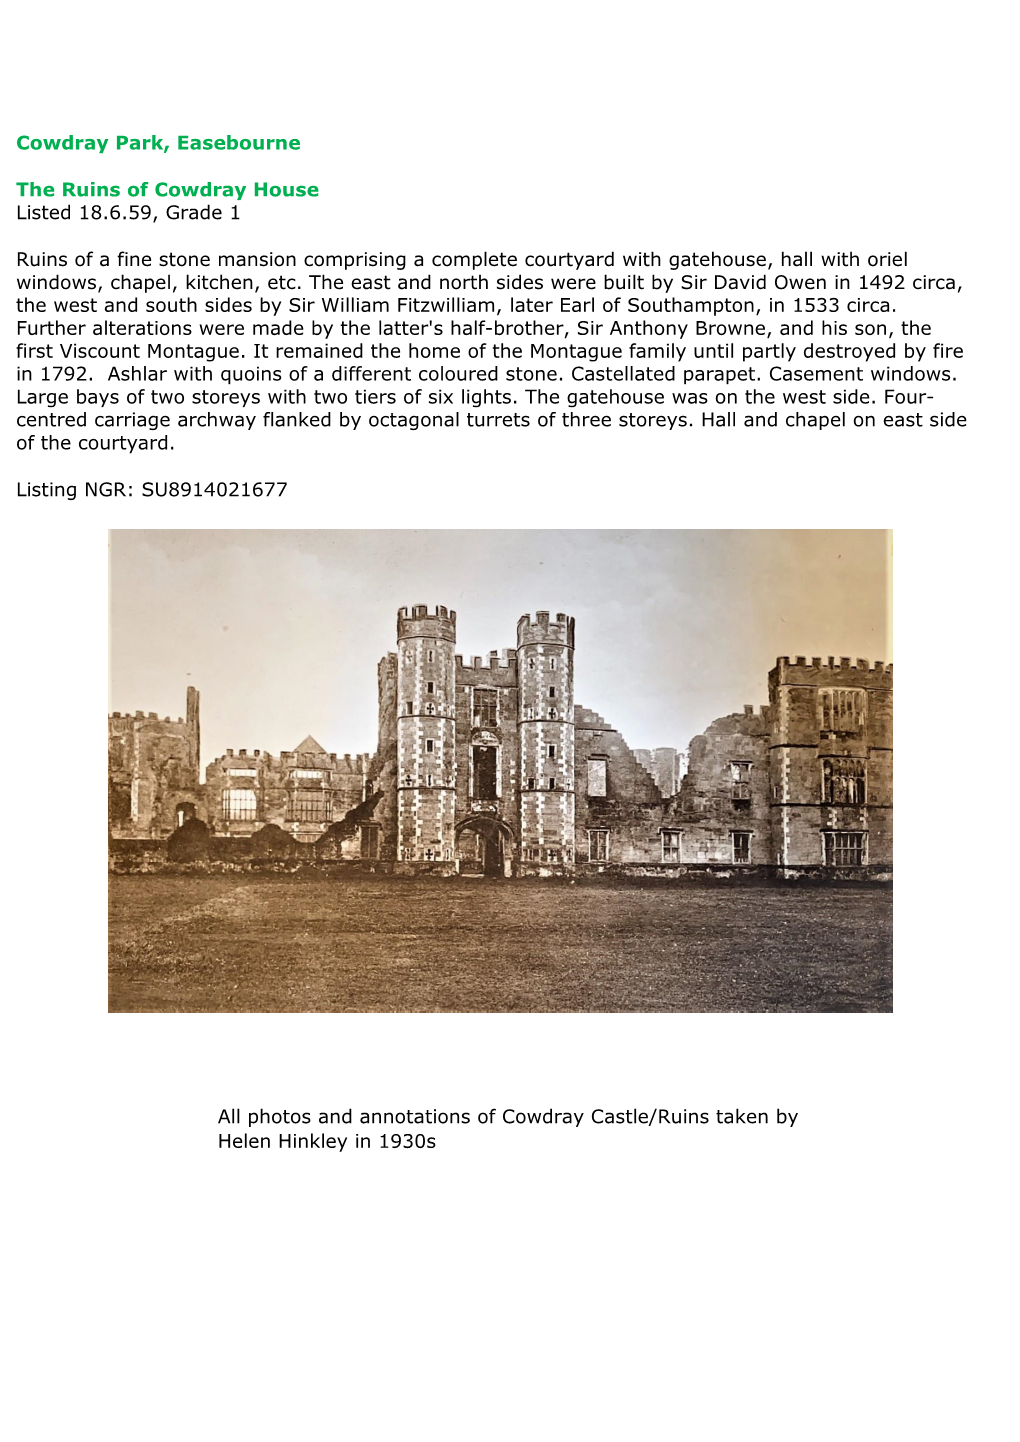 Cowdray Park, Easebourne the Ruins of Cowdray House Listed 18.6.59, Grade 1 Ruins of a Fine Stone Mansion Comprising a Complete